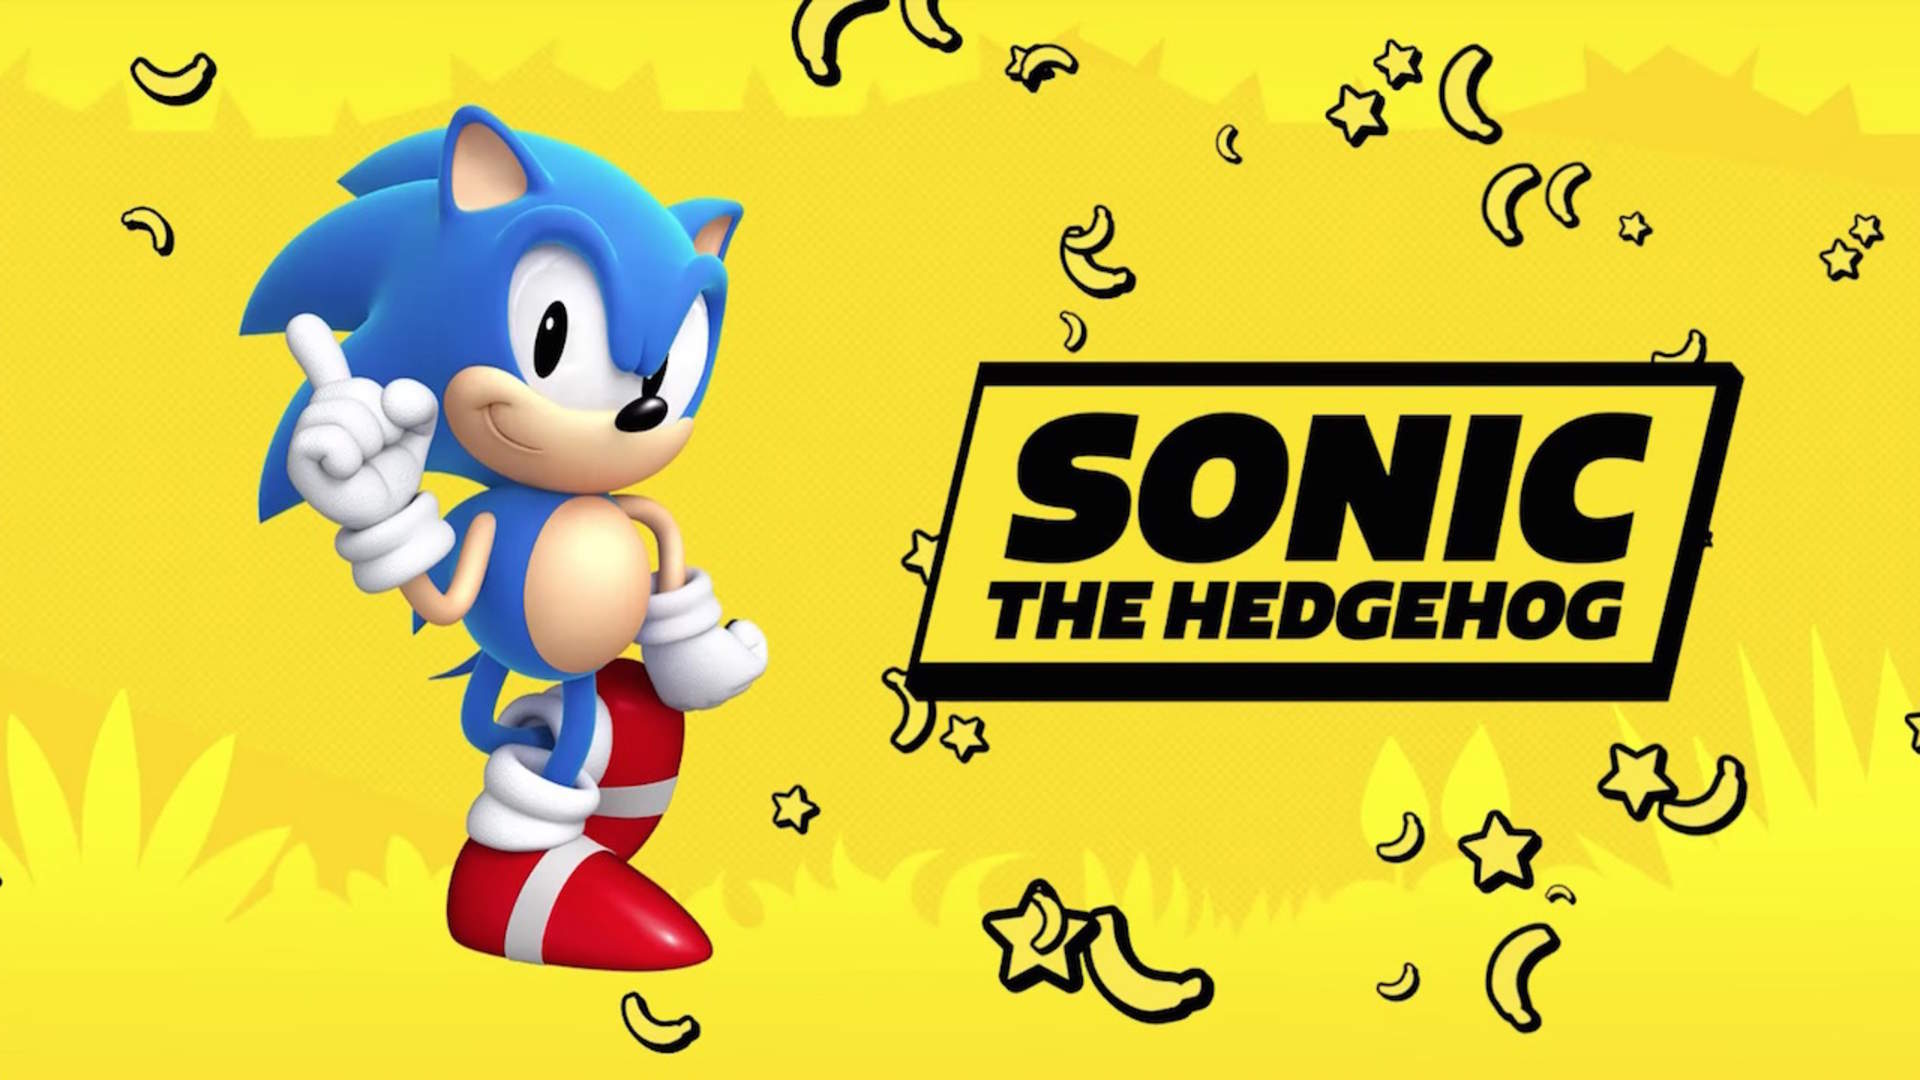 The Good Version of Sonic the Hedgehog Is Coming to Super Monkey